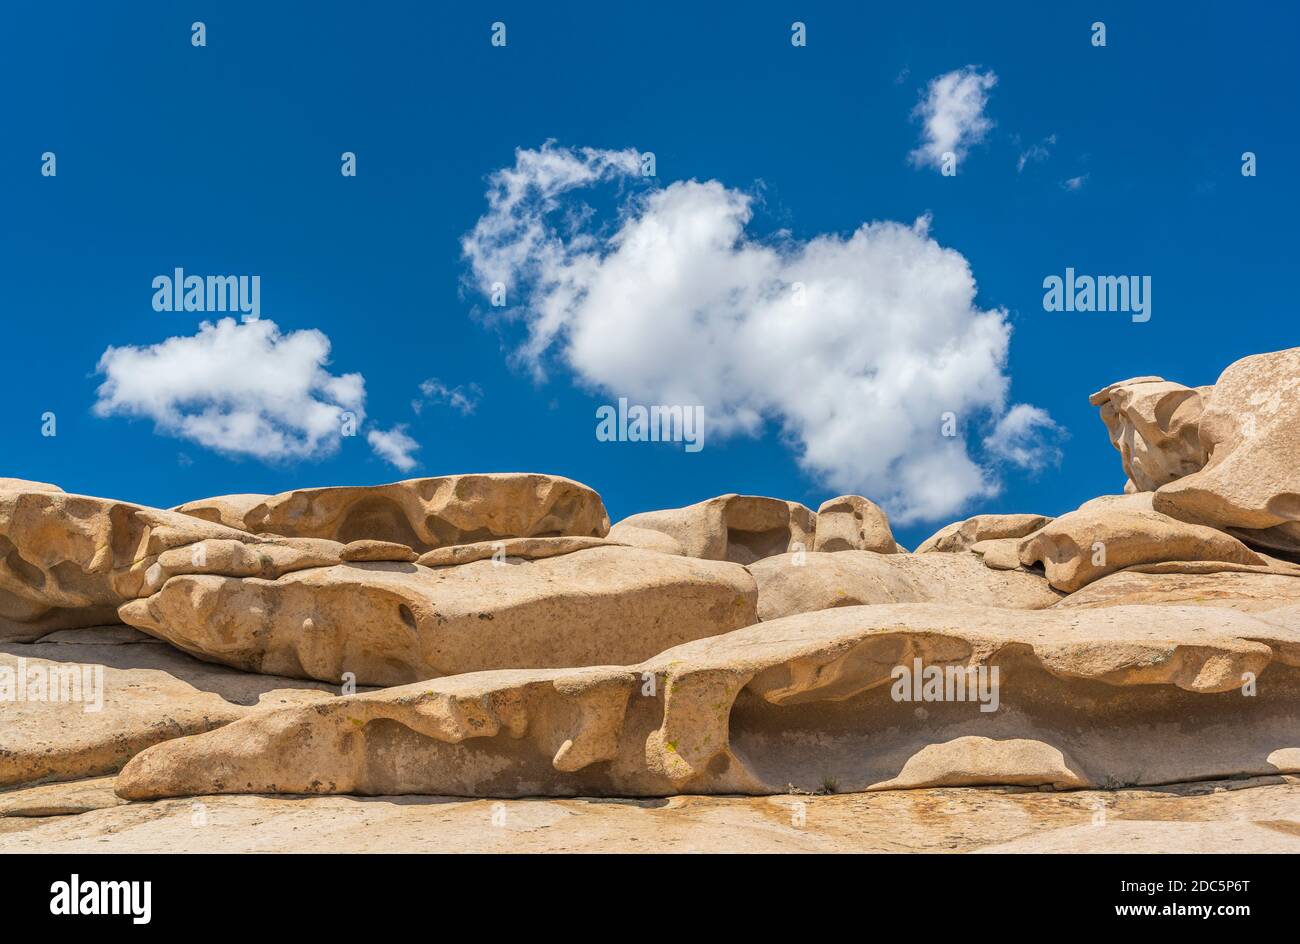 Rock formations in Bektau Ata in Kazakhstan with sculptures on a summers day. Stock Photo